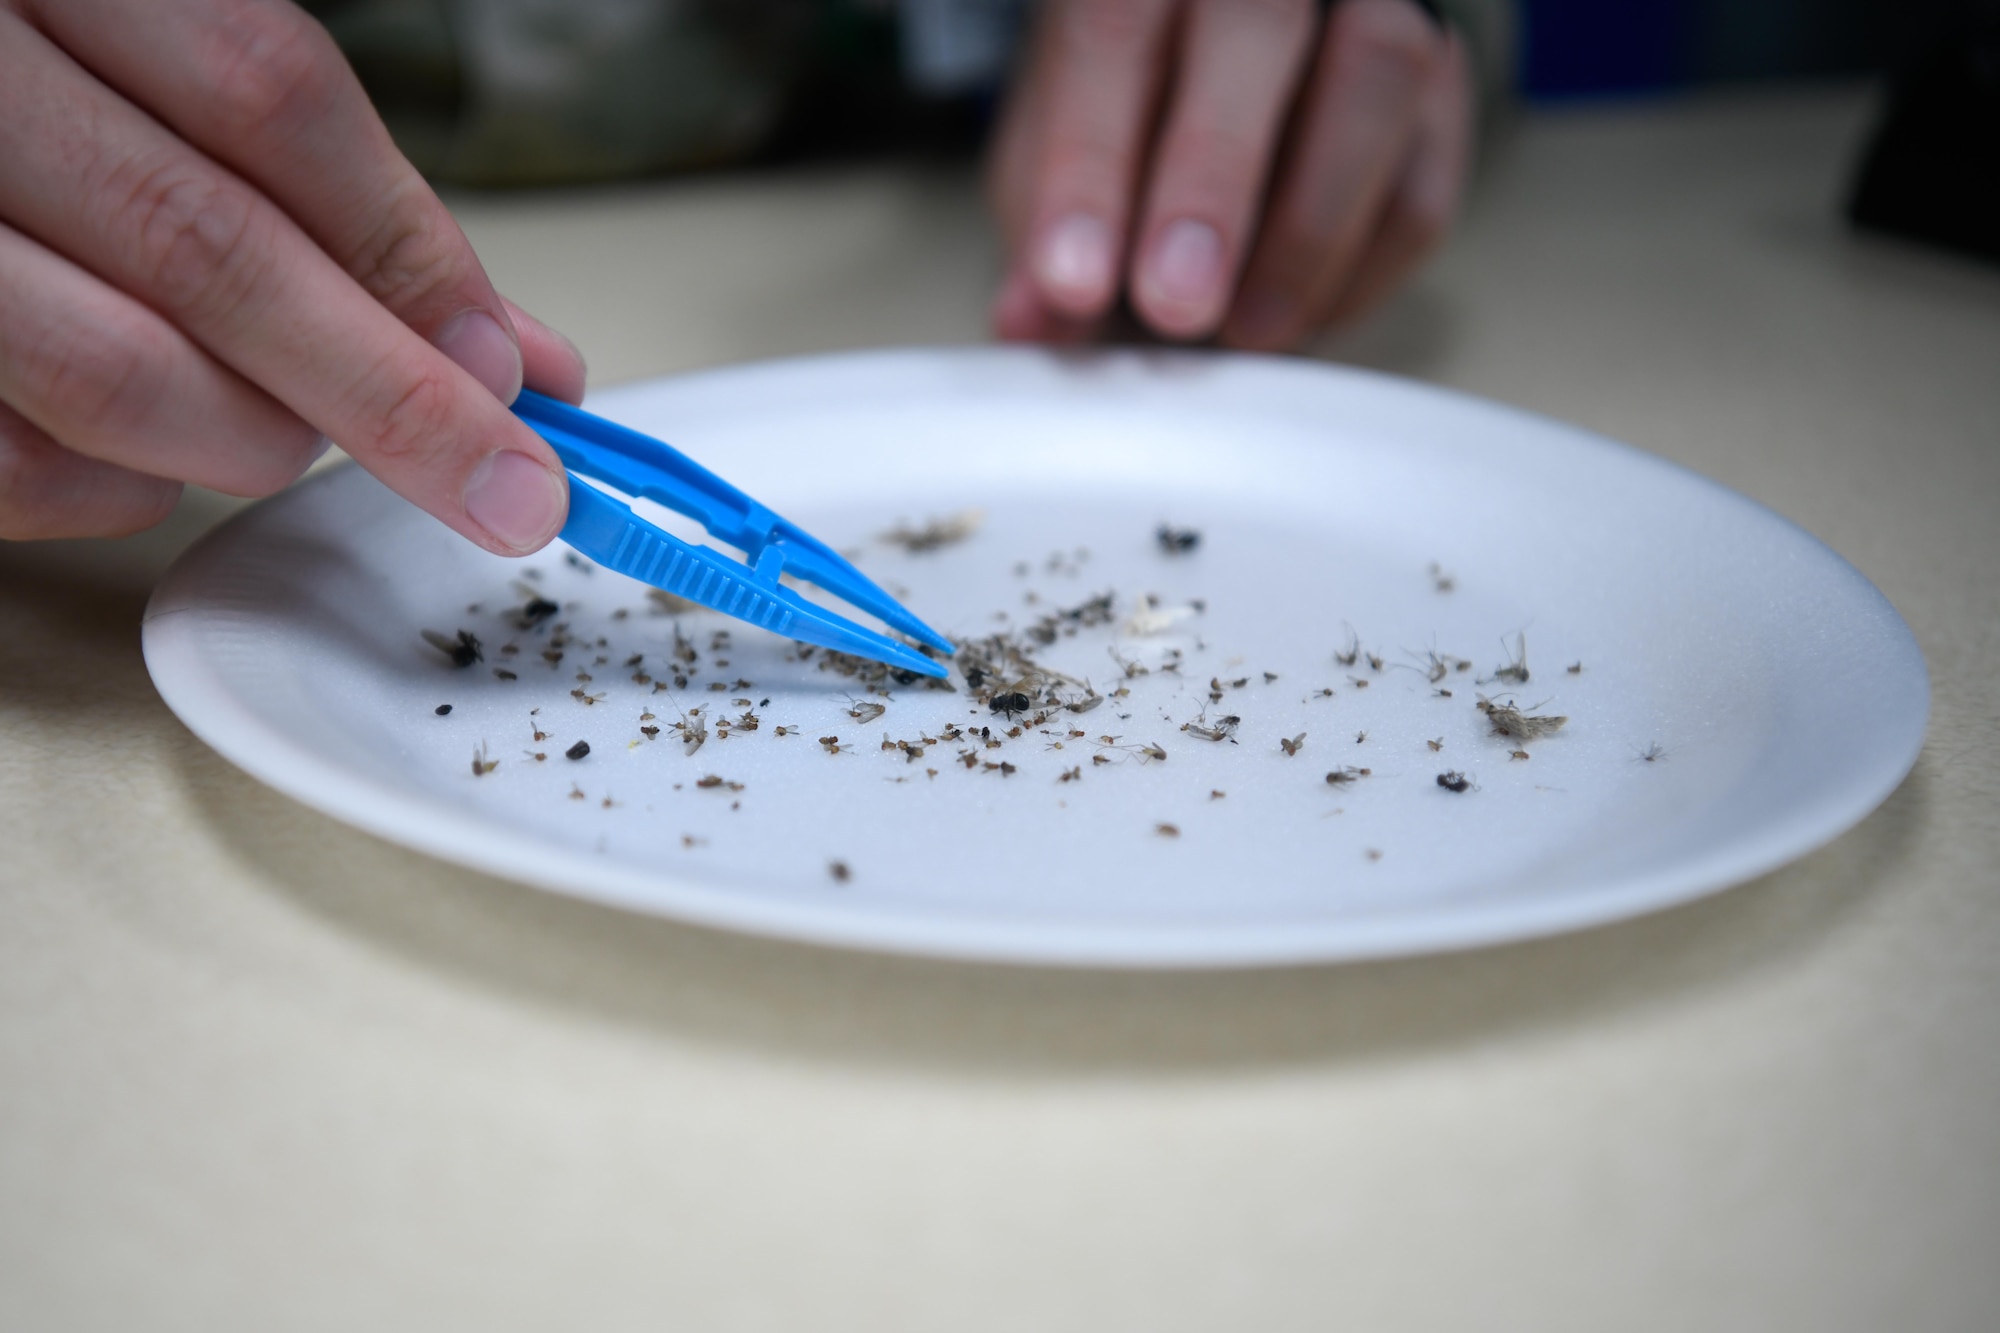 A service member sorts through a plate of insects.